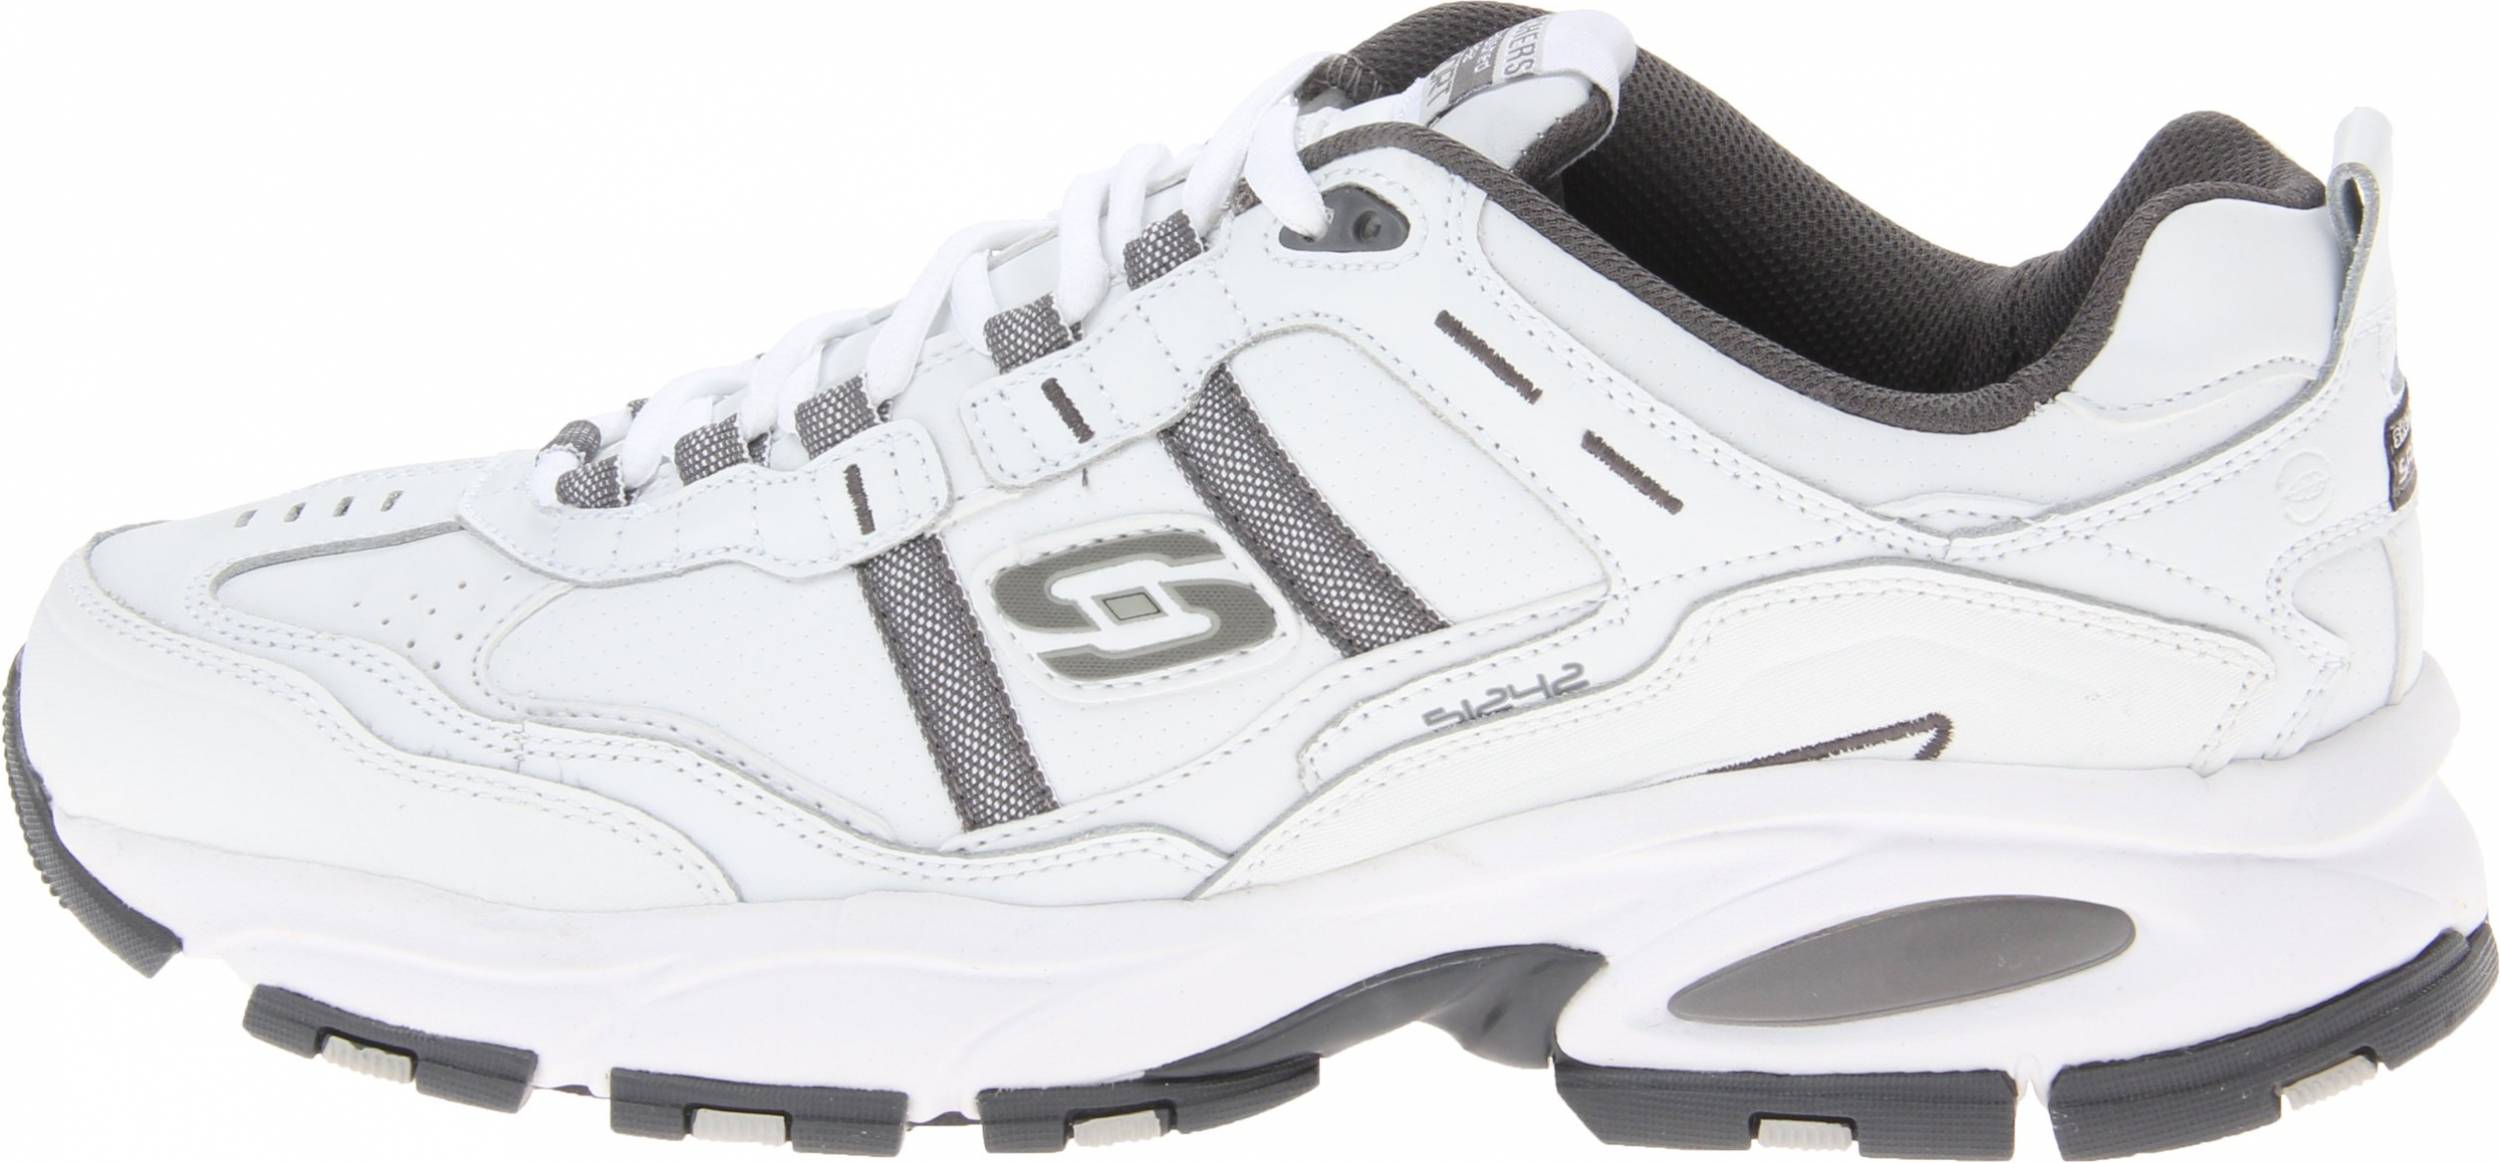 skechers extra wide trainers